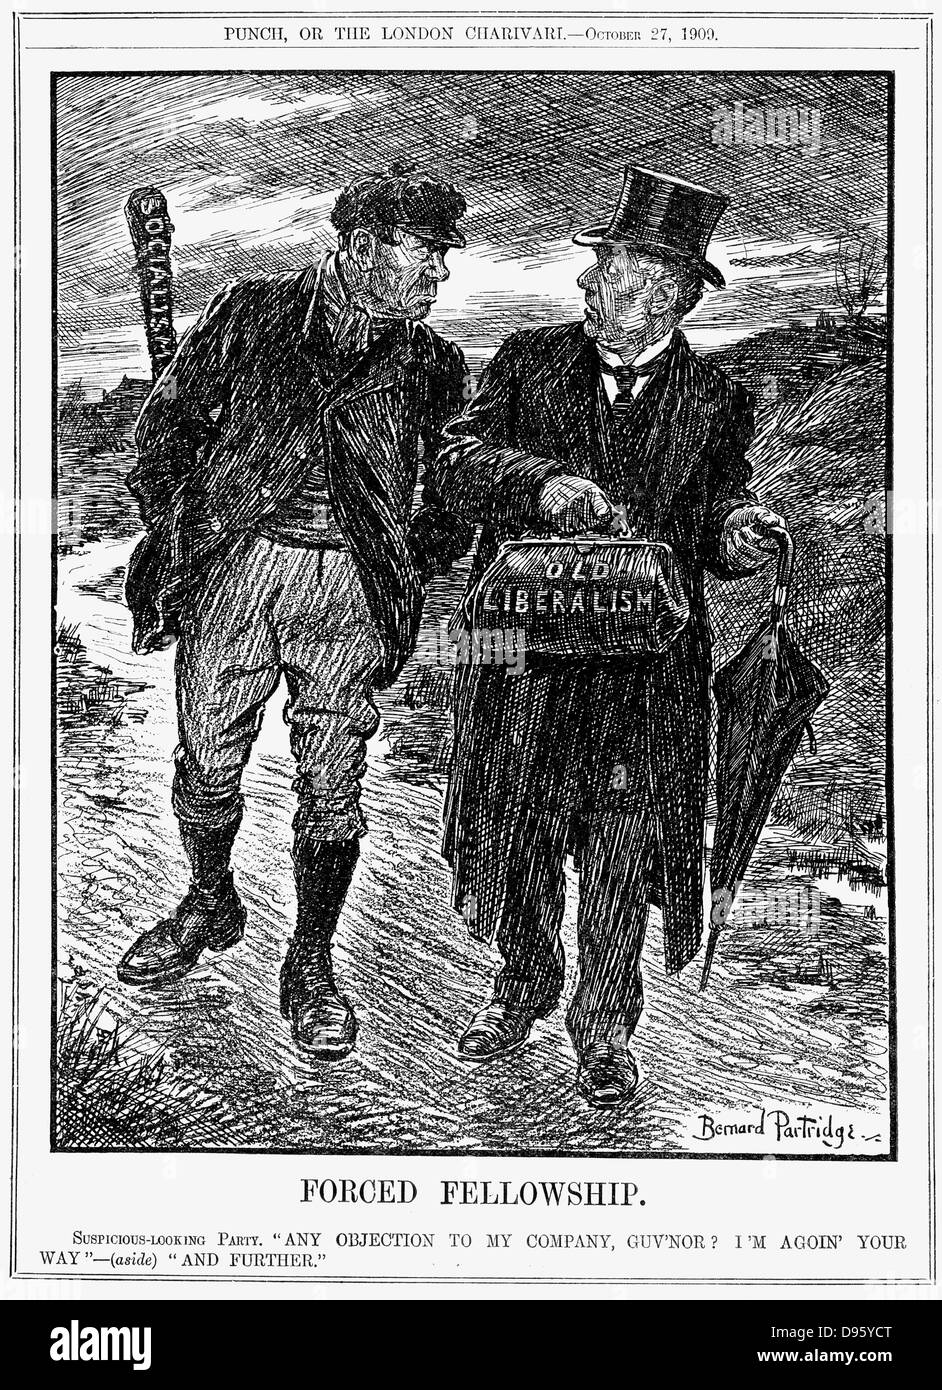 The policies of the British Liberal party were seen by some as creeping Socialism and, at the general election of January 1910, their parliamentary majority was sharply cut. Cartoon by Bernard Partridge from 'Punch', London, October 1909. Stock Photo